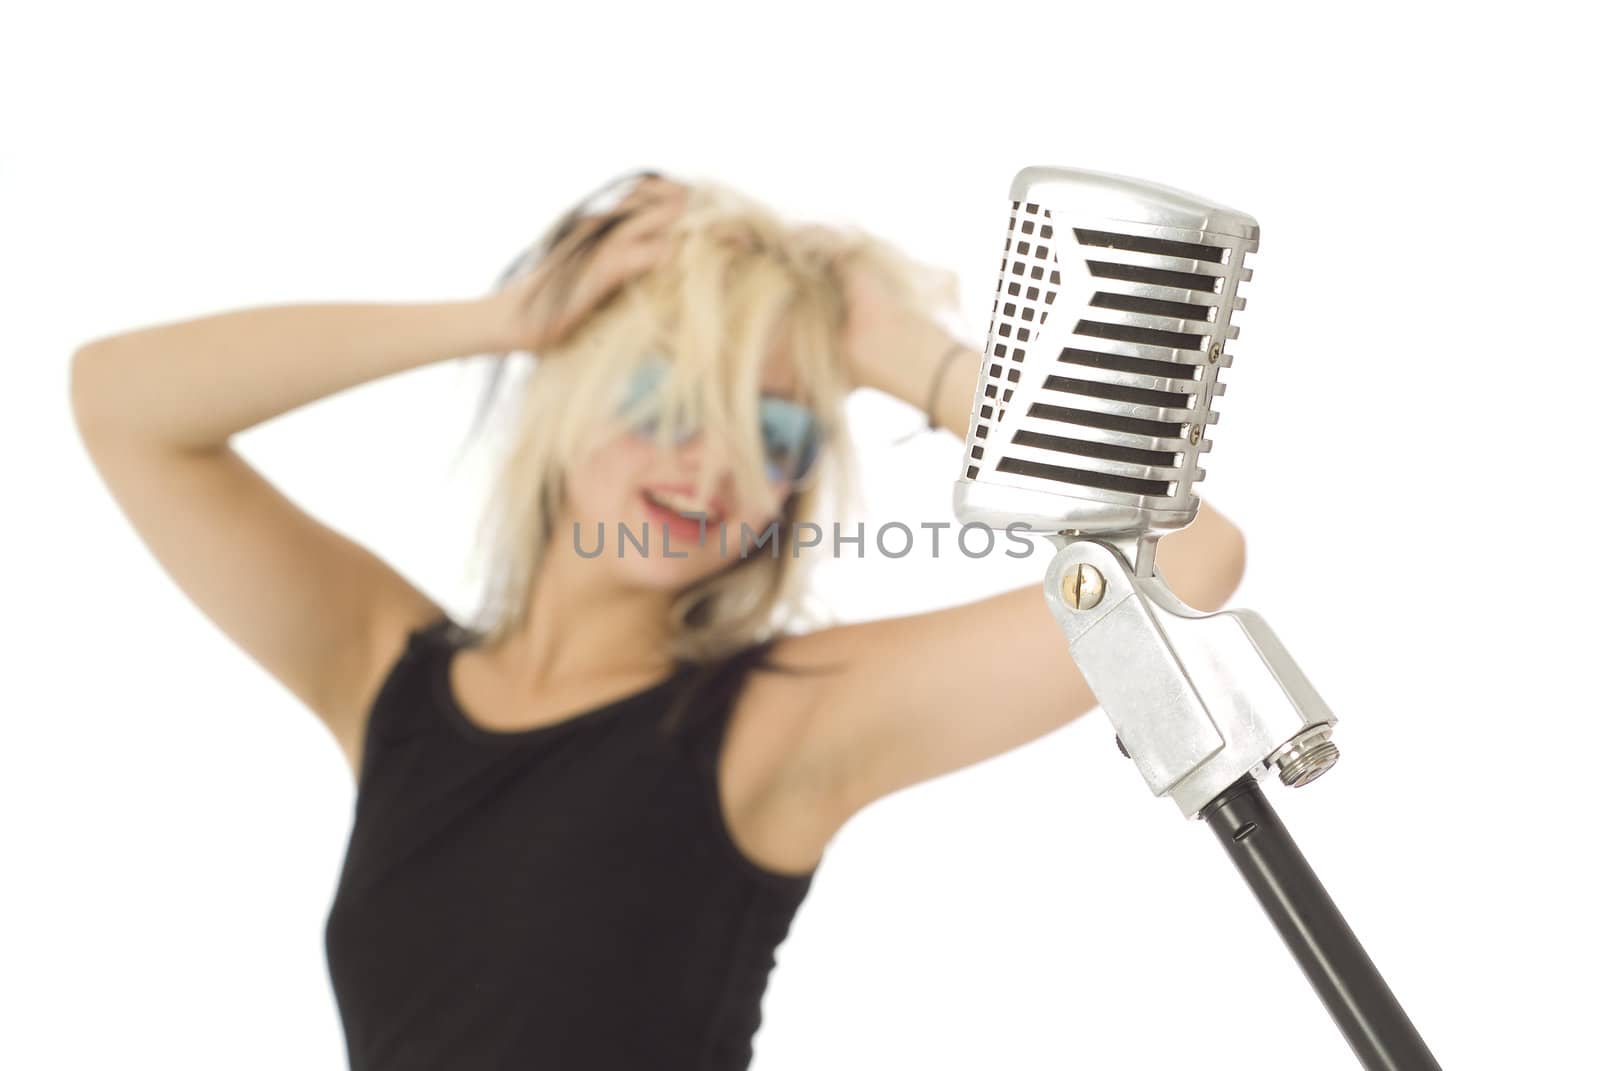 Retro microphone with rocking singer and sunglasses out of focus in background